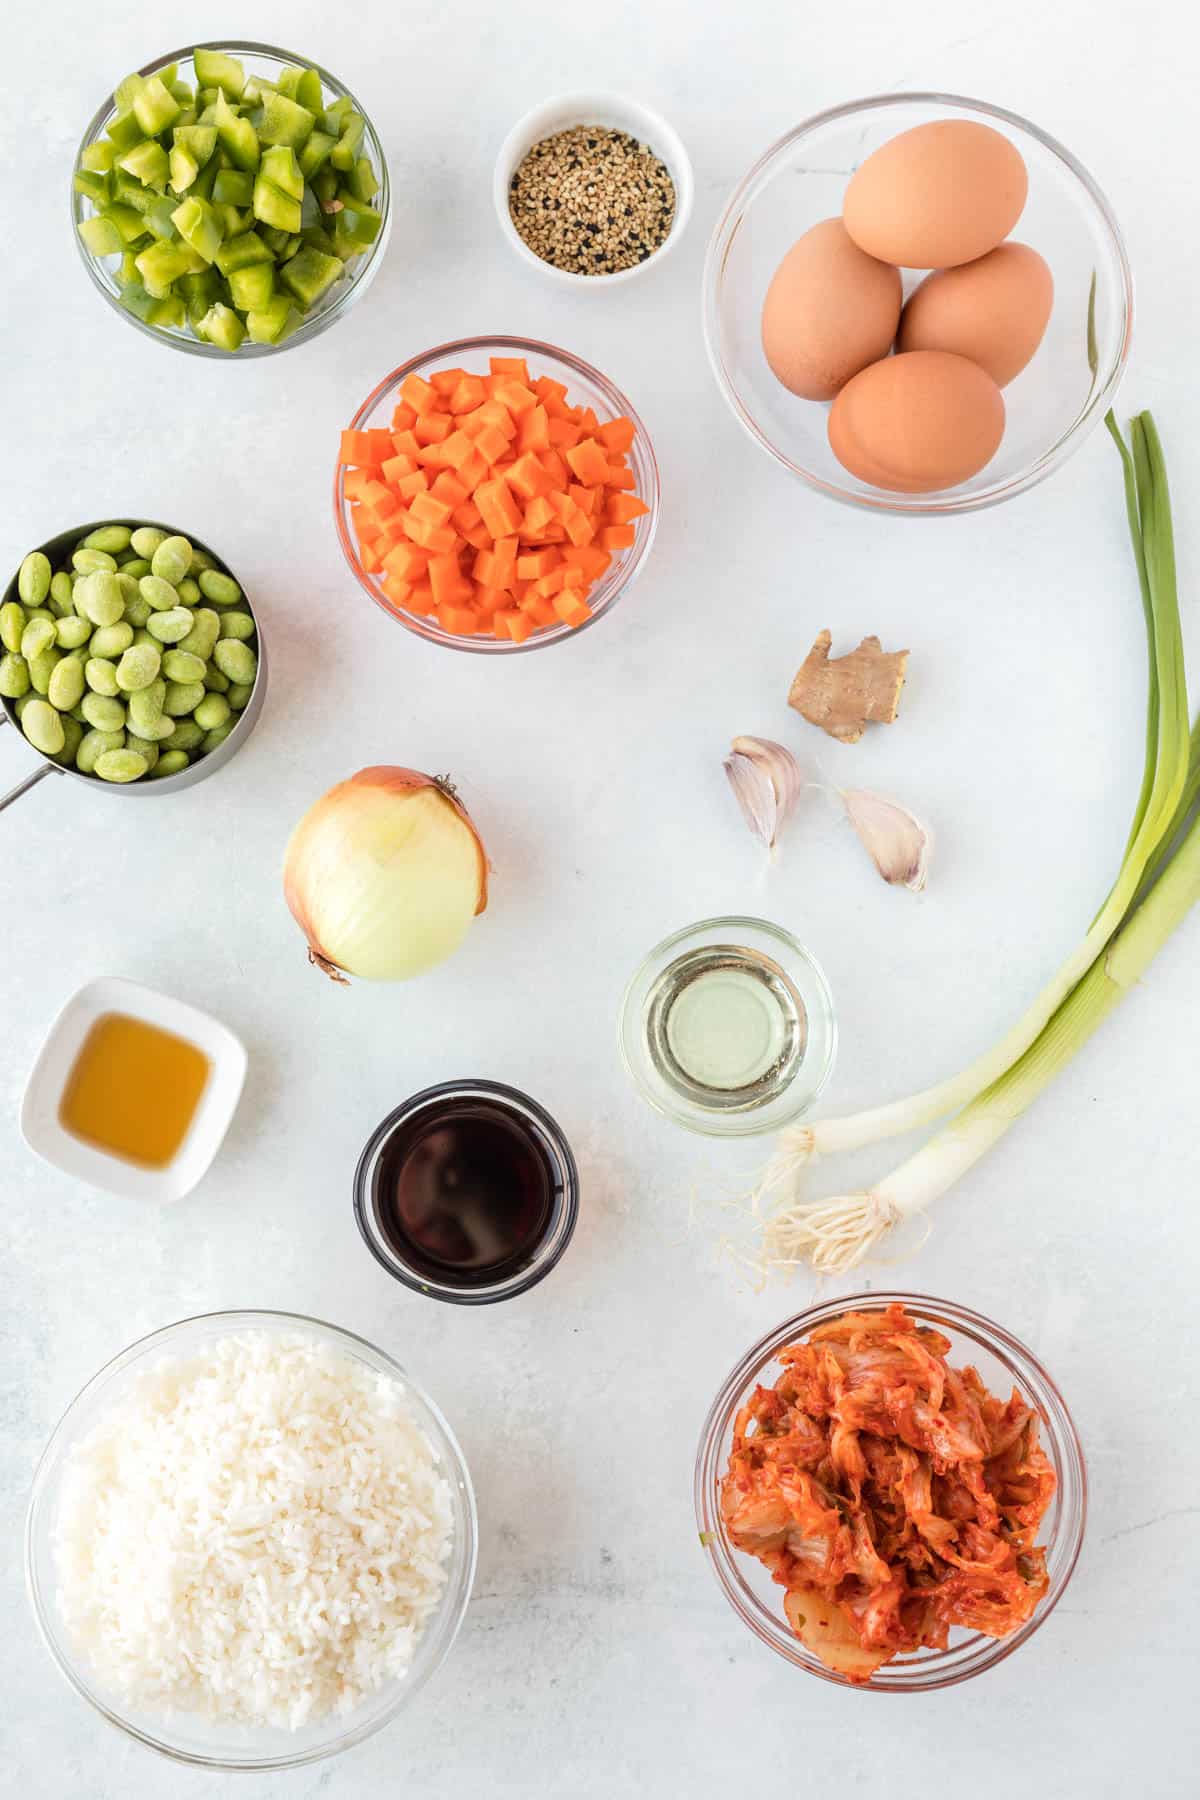 The ingredients for kimchi are spread out on a white surface.